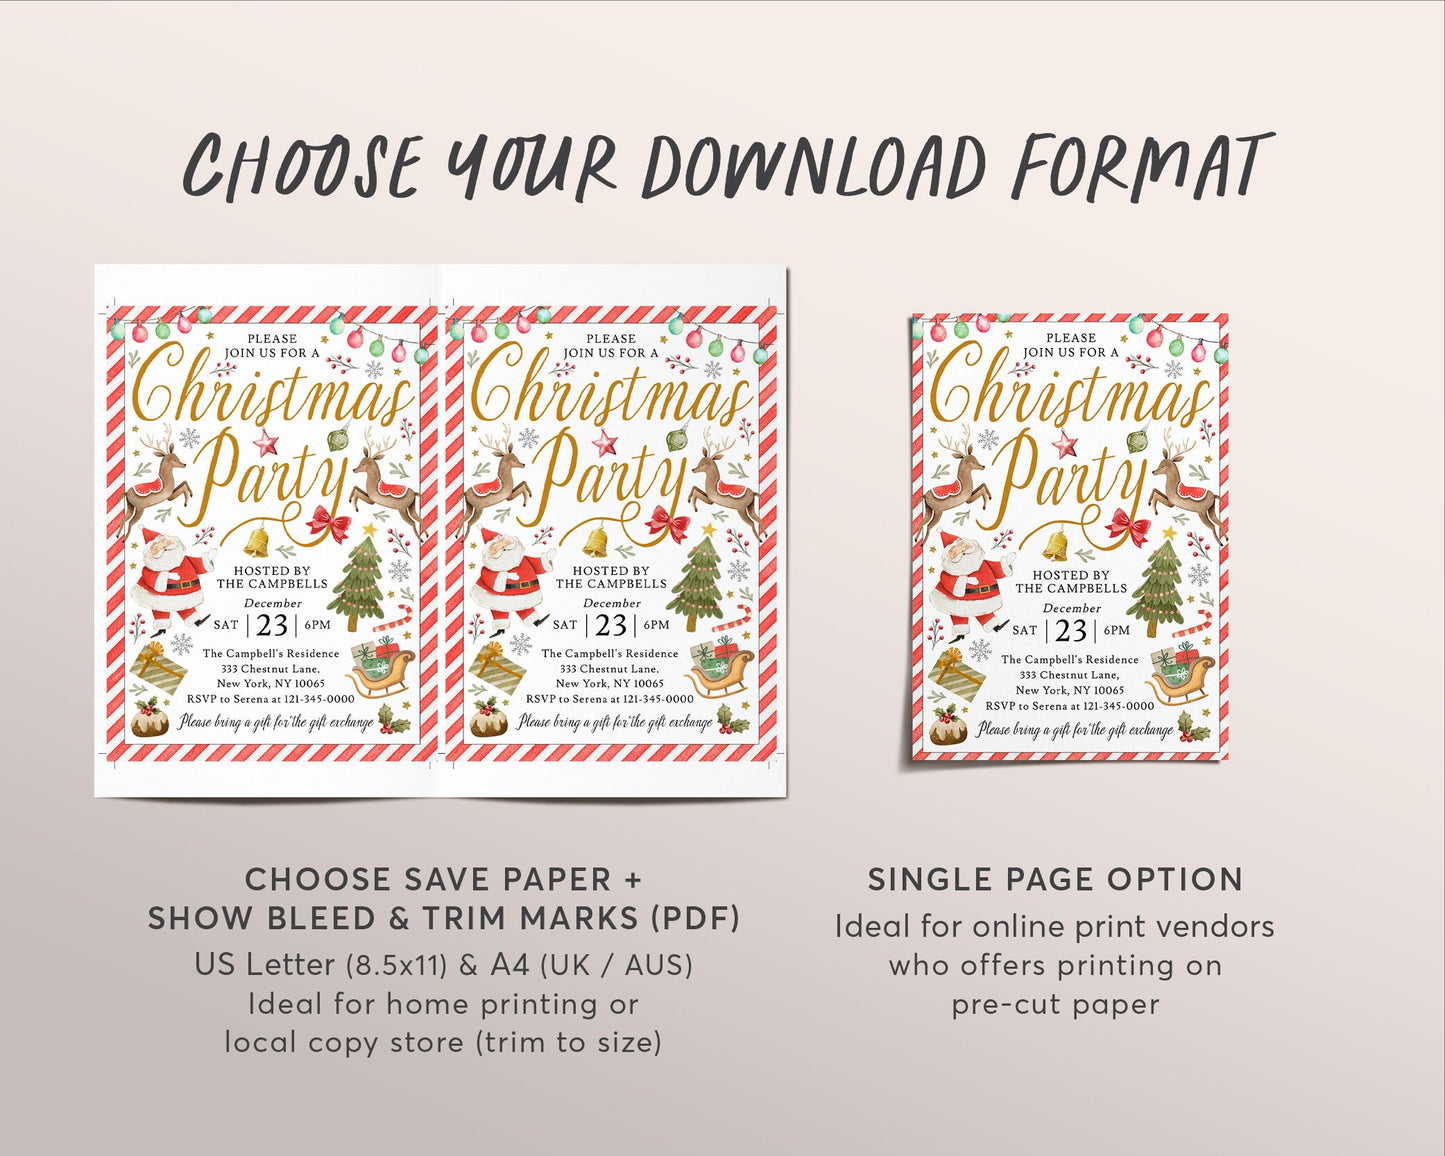 Christmas Party Invitation Editable Template, Holiday Party Santa Invite For Kids And Adults Invite Evite Printable, Festive Work Party DIY